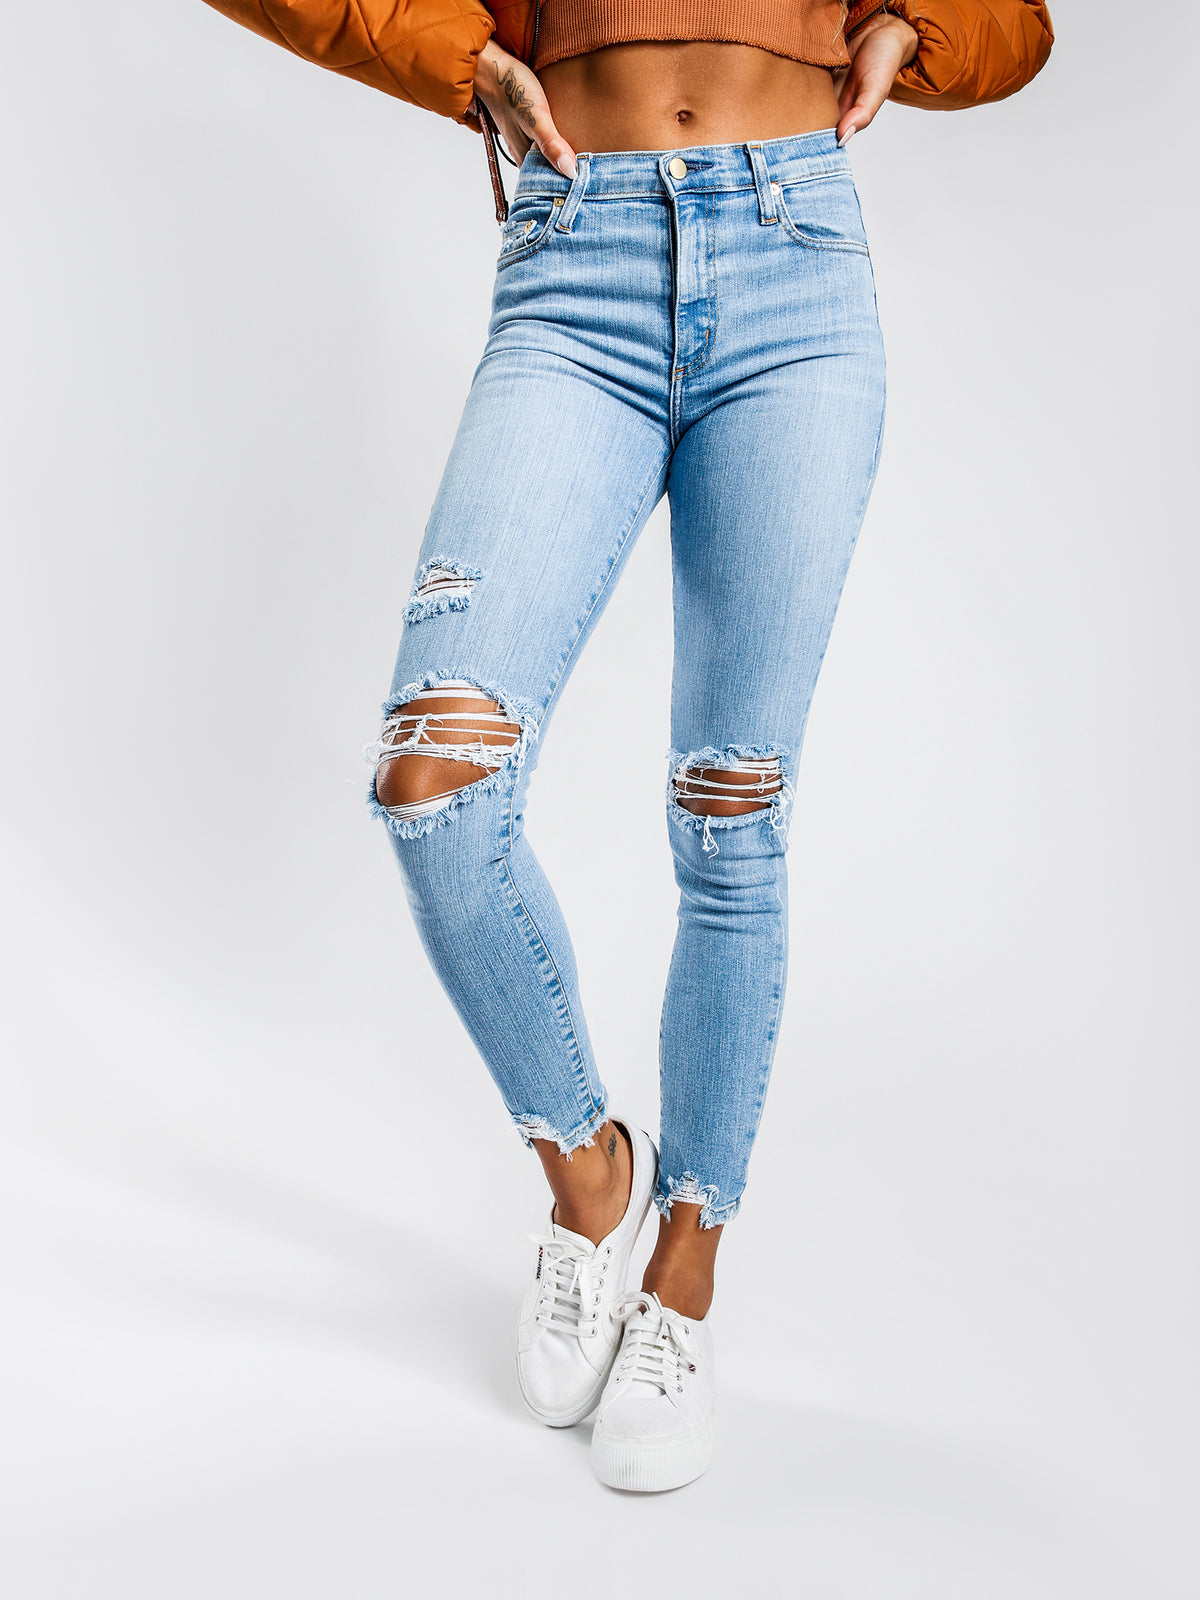 Cult Skinny High Rise Ankle Jeans in Artistry Blue Denim